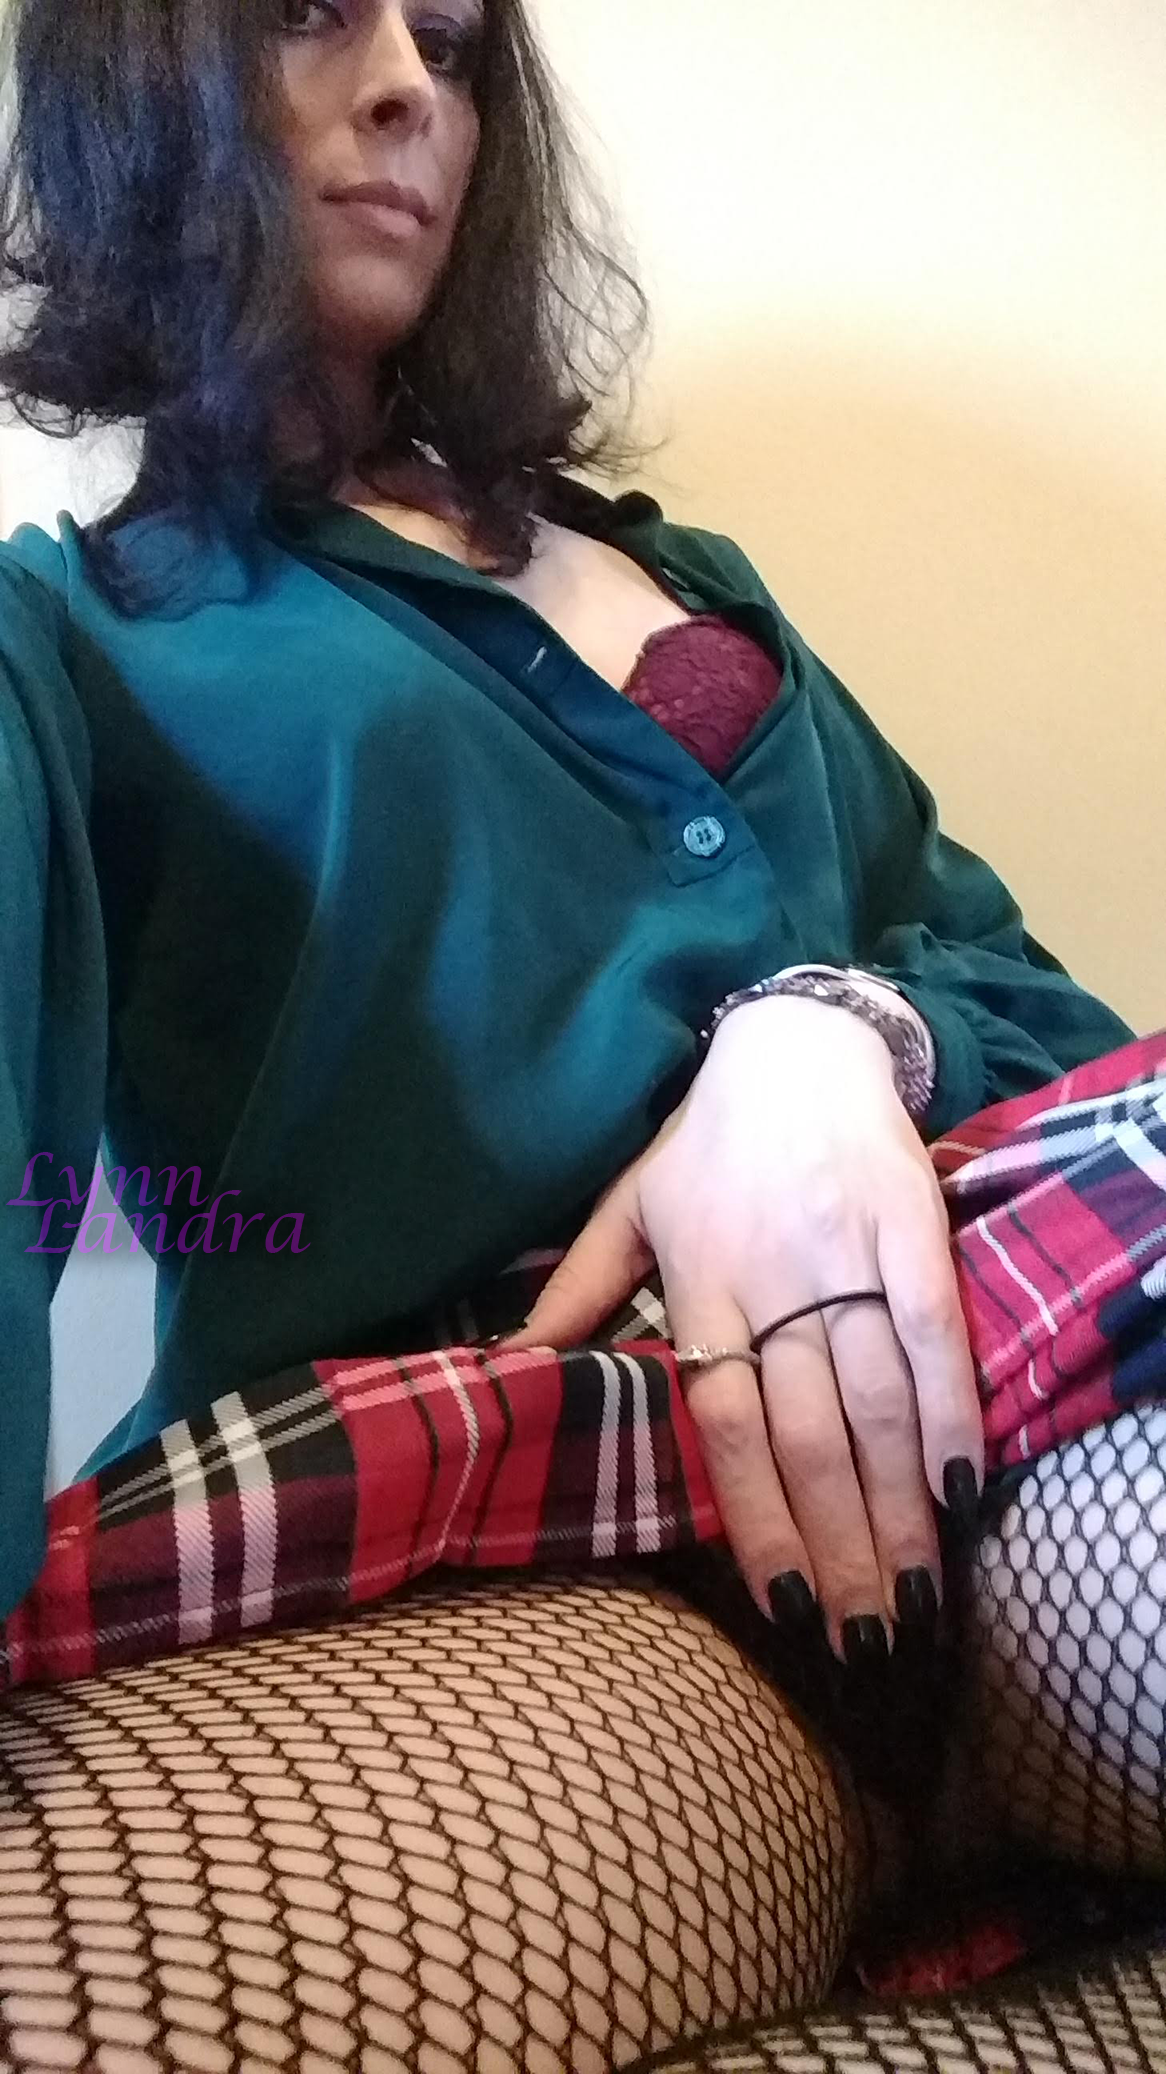 Watch the Photo by LynnLandra with the username @LynnLandra, who is a star user, posted on January 9, 2019. The post is about the topic Posh Trash. and the text says 'I had the best outfit this Christmas!'